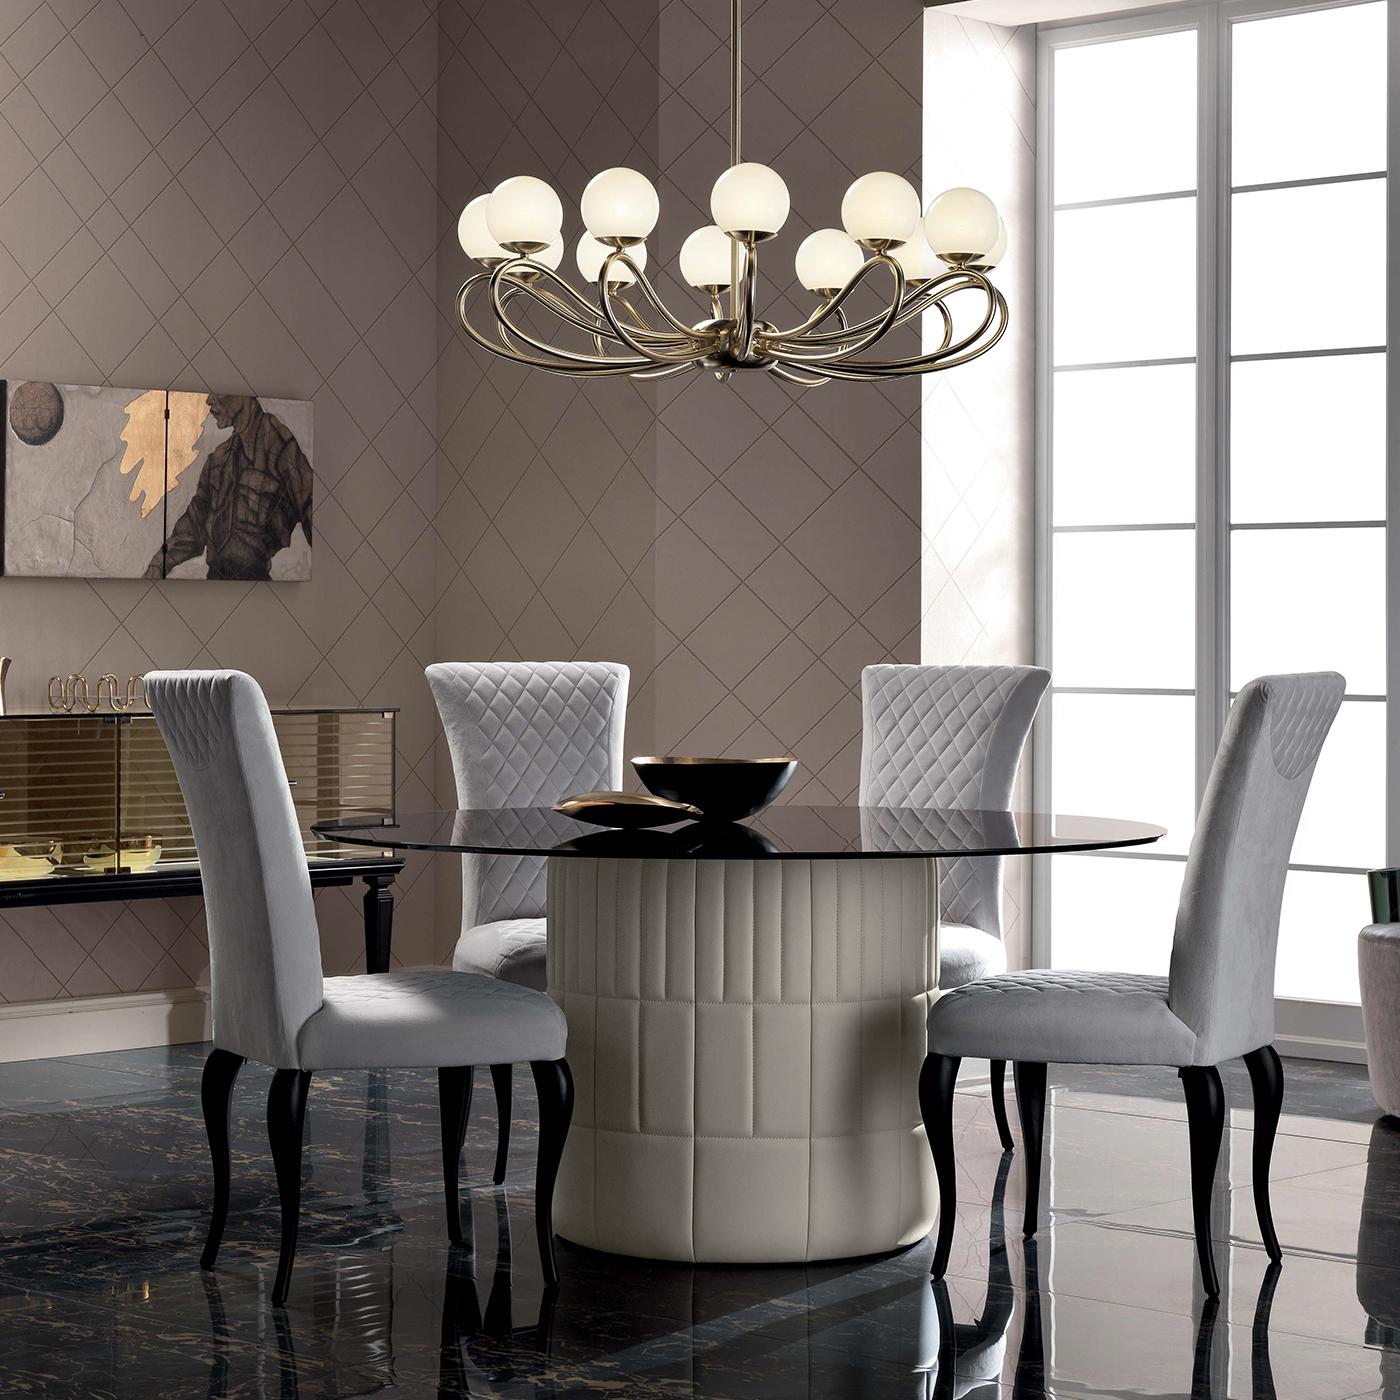 Designed by by Marzia and Leo Dainelli for Veblen, this round table displays Classic appeal and timeless elegance that will elevate any dining room interior. This exquisite piece features a back-lacquered, tempered glass top with smoked finish and